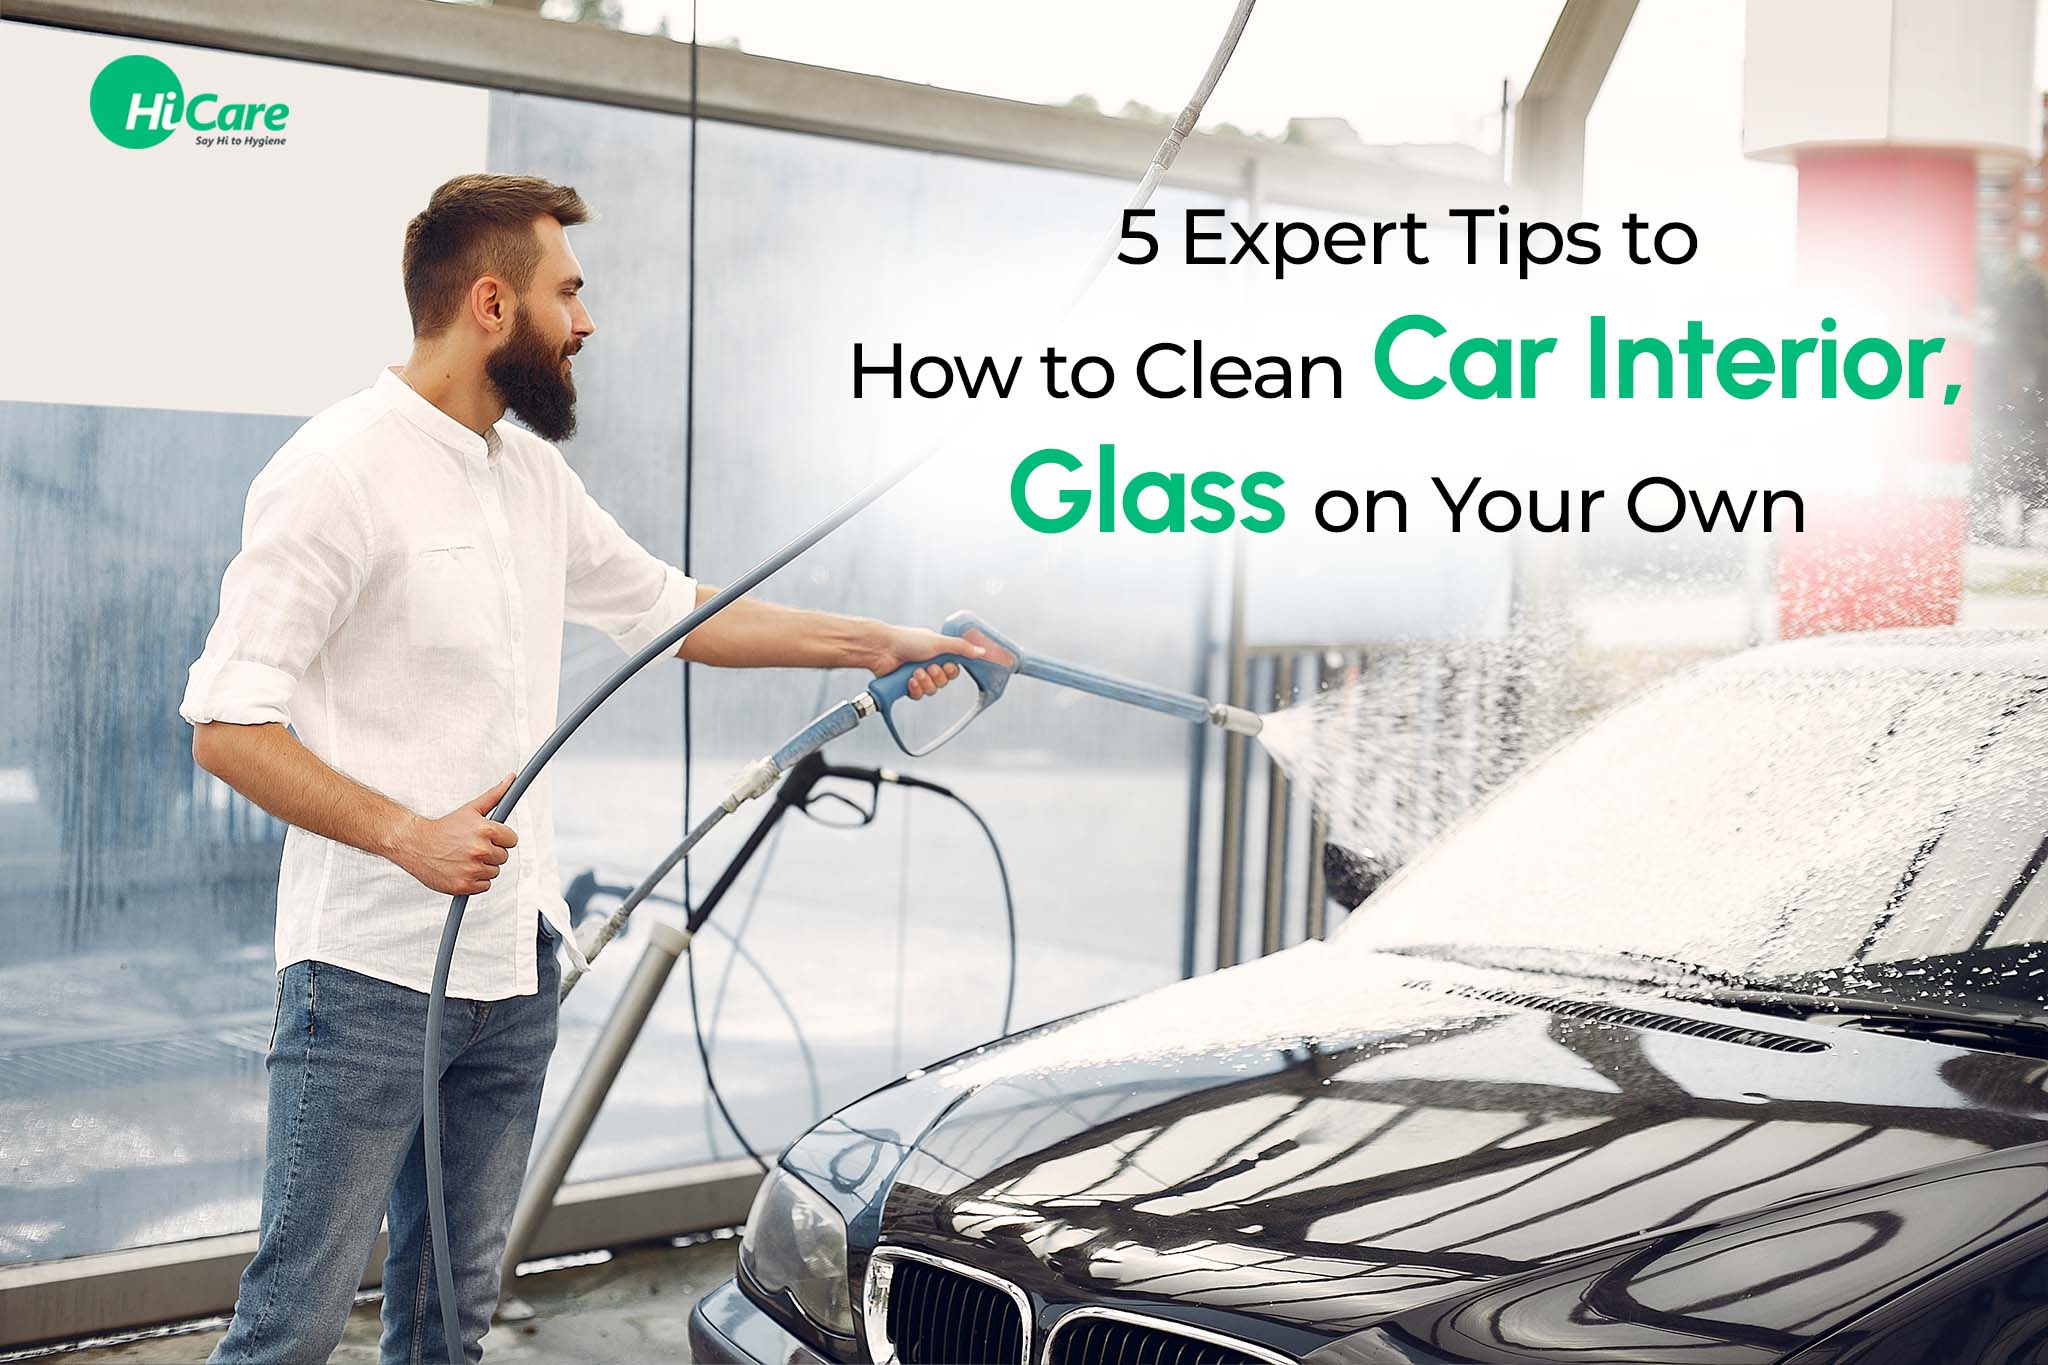 5 Expert Tips to How to Clean Car Interior, Glass on Your Own